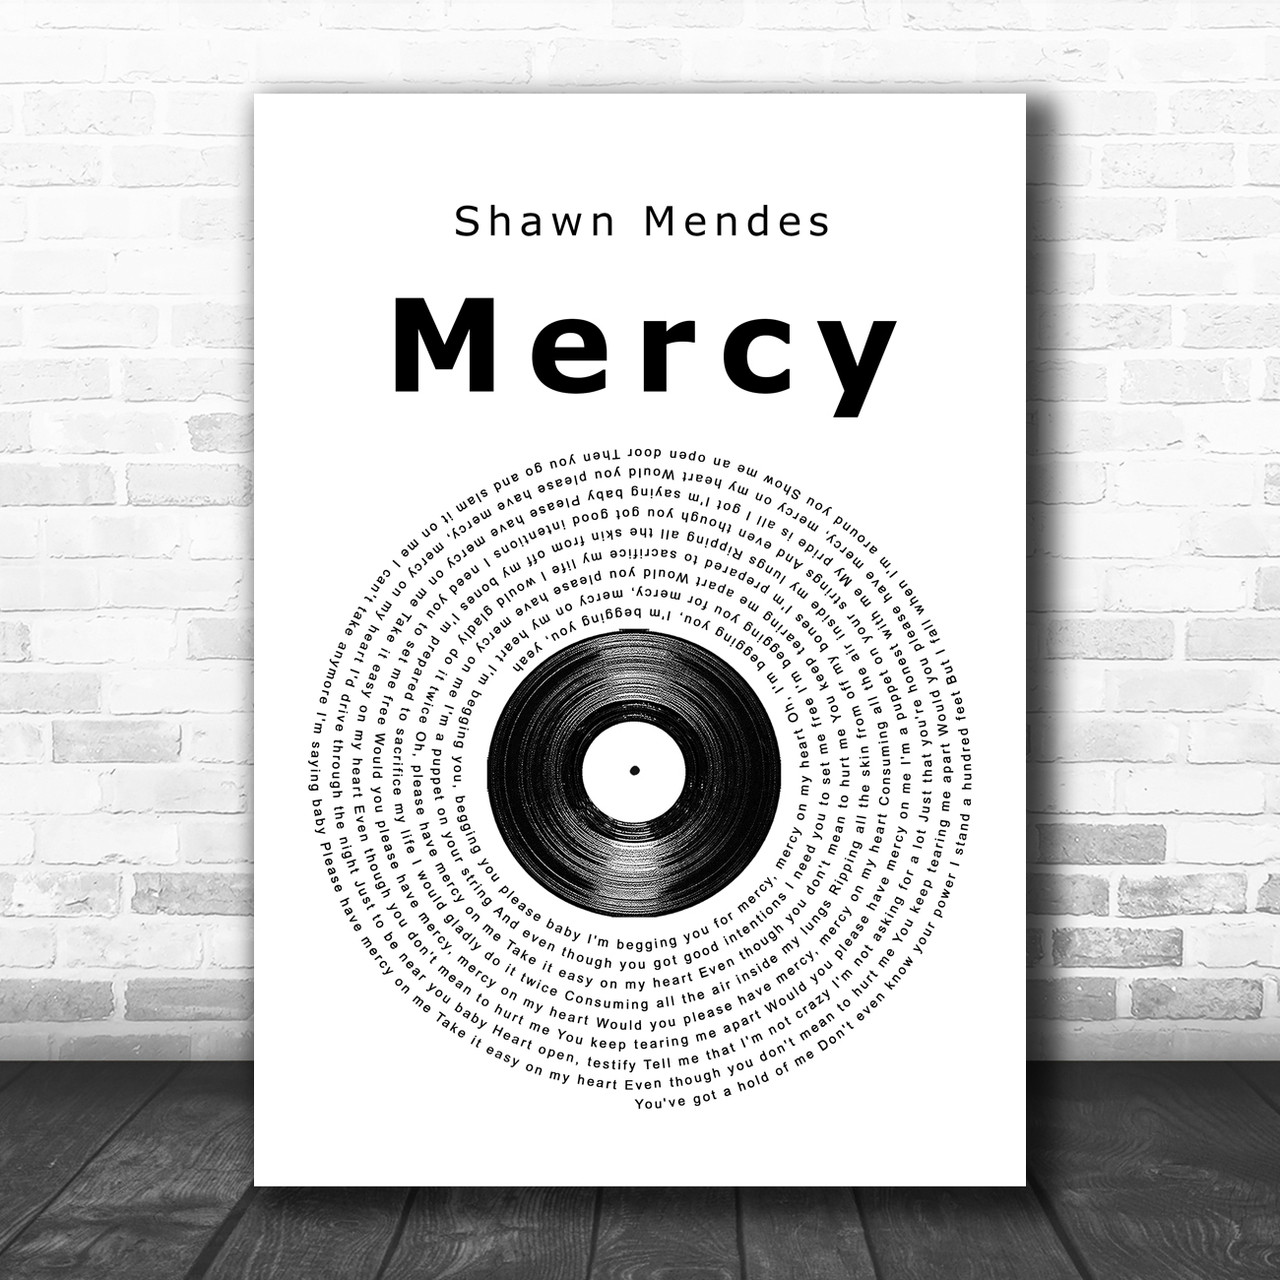 Shawn Mendes Song Lyrics Canvas Prints for Sale